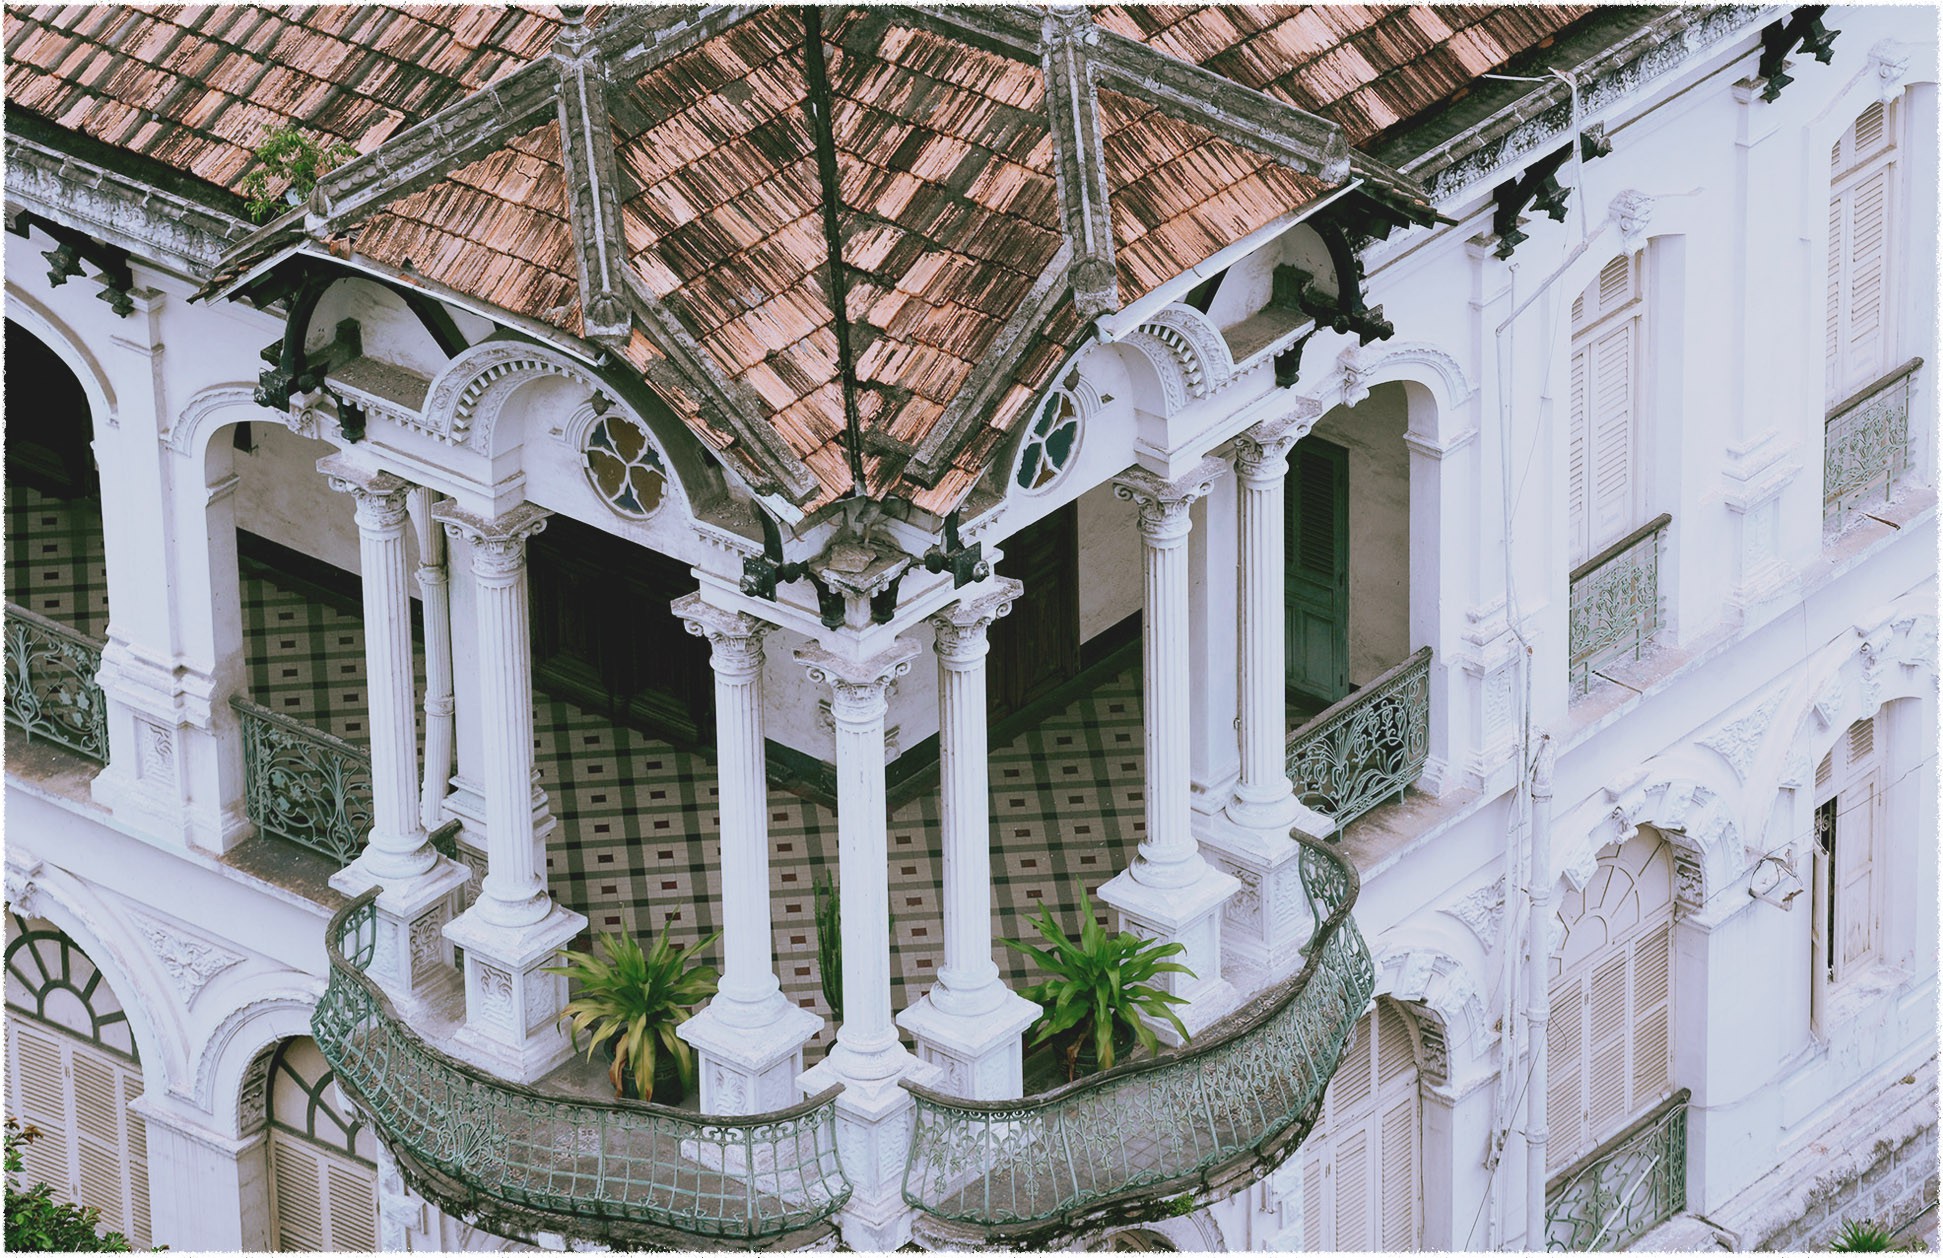 Ho Chi Minh City indexes French-era villas for conservation